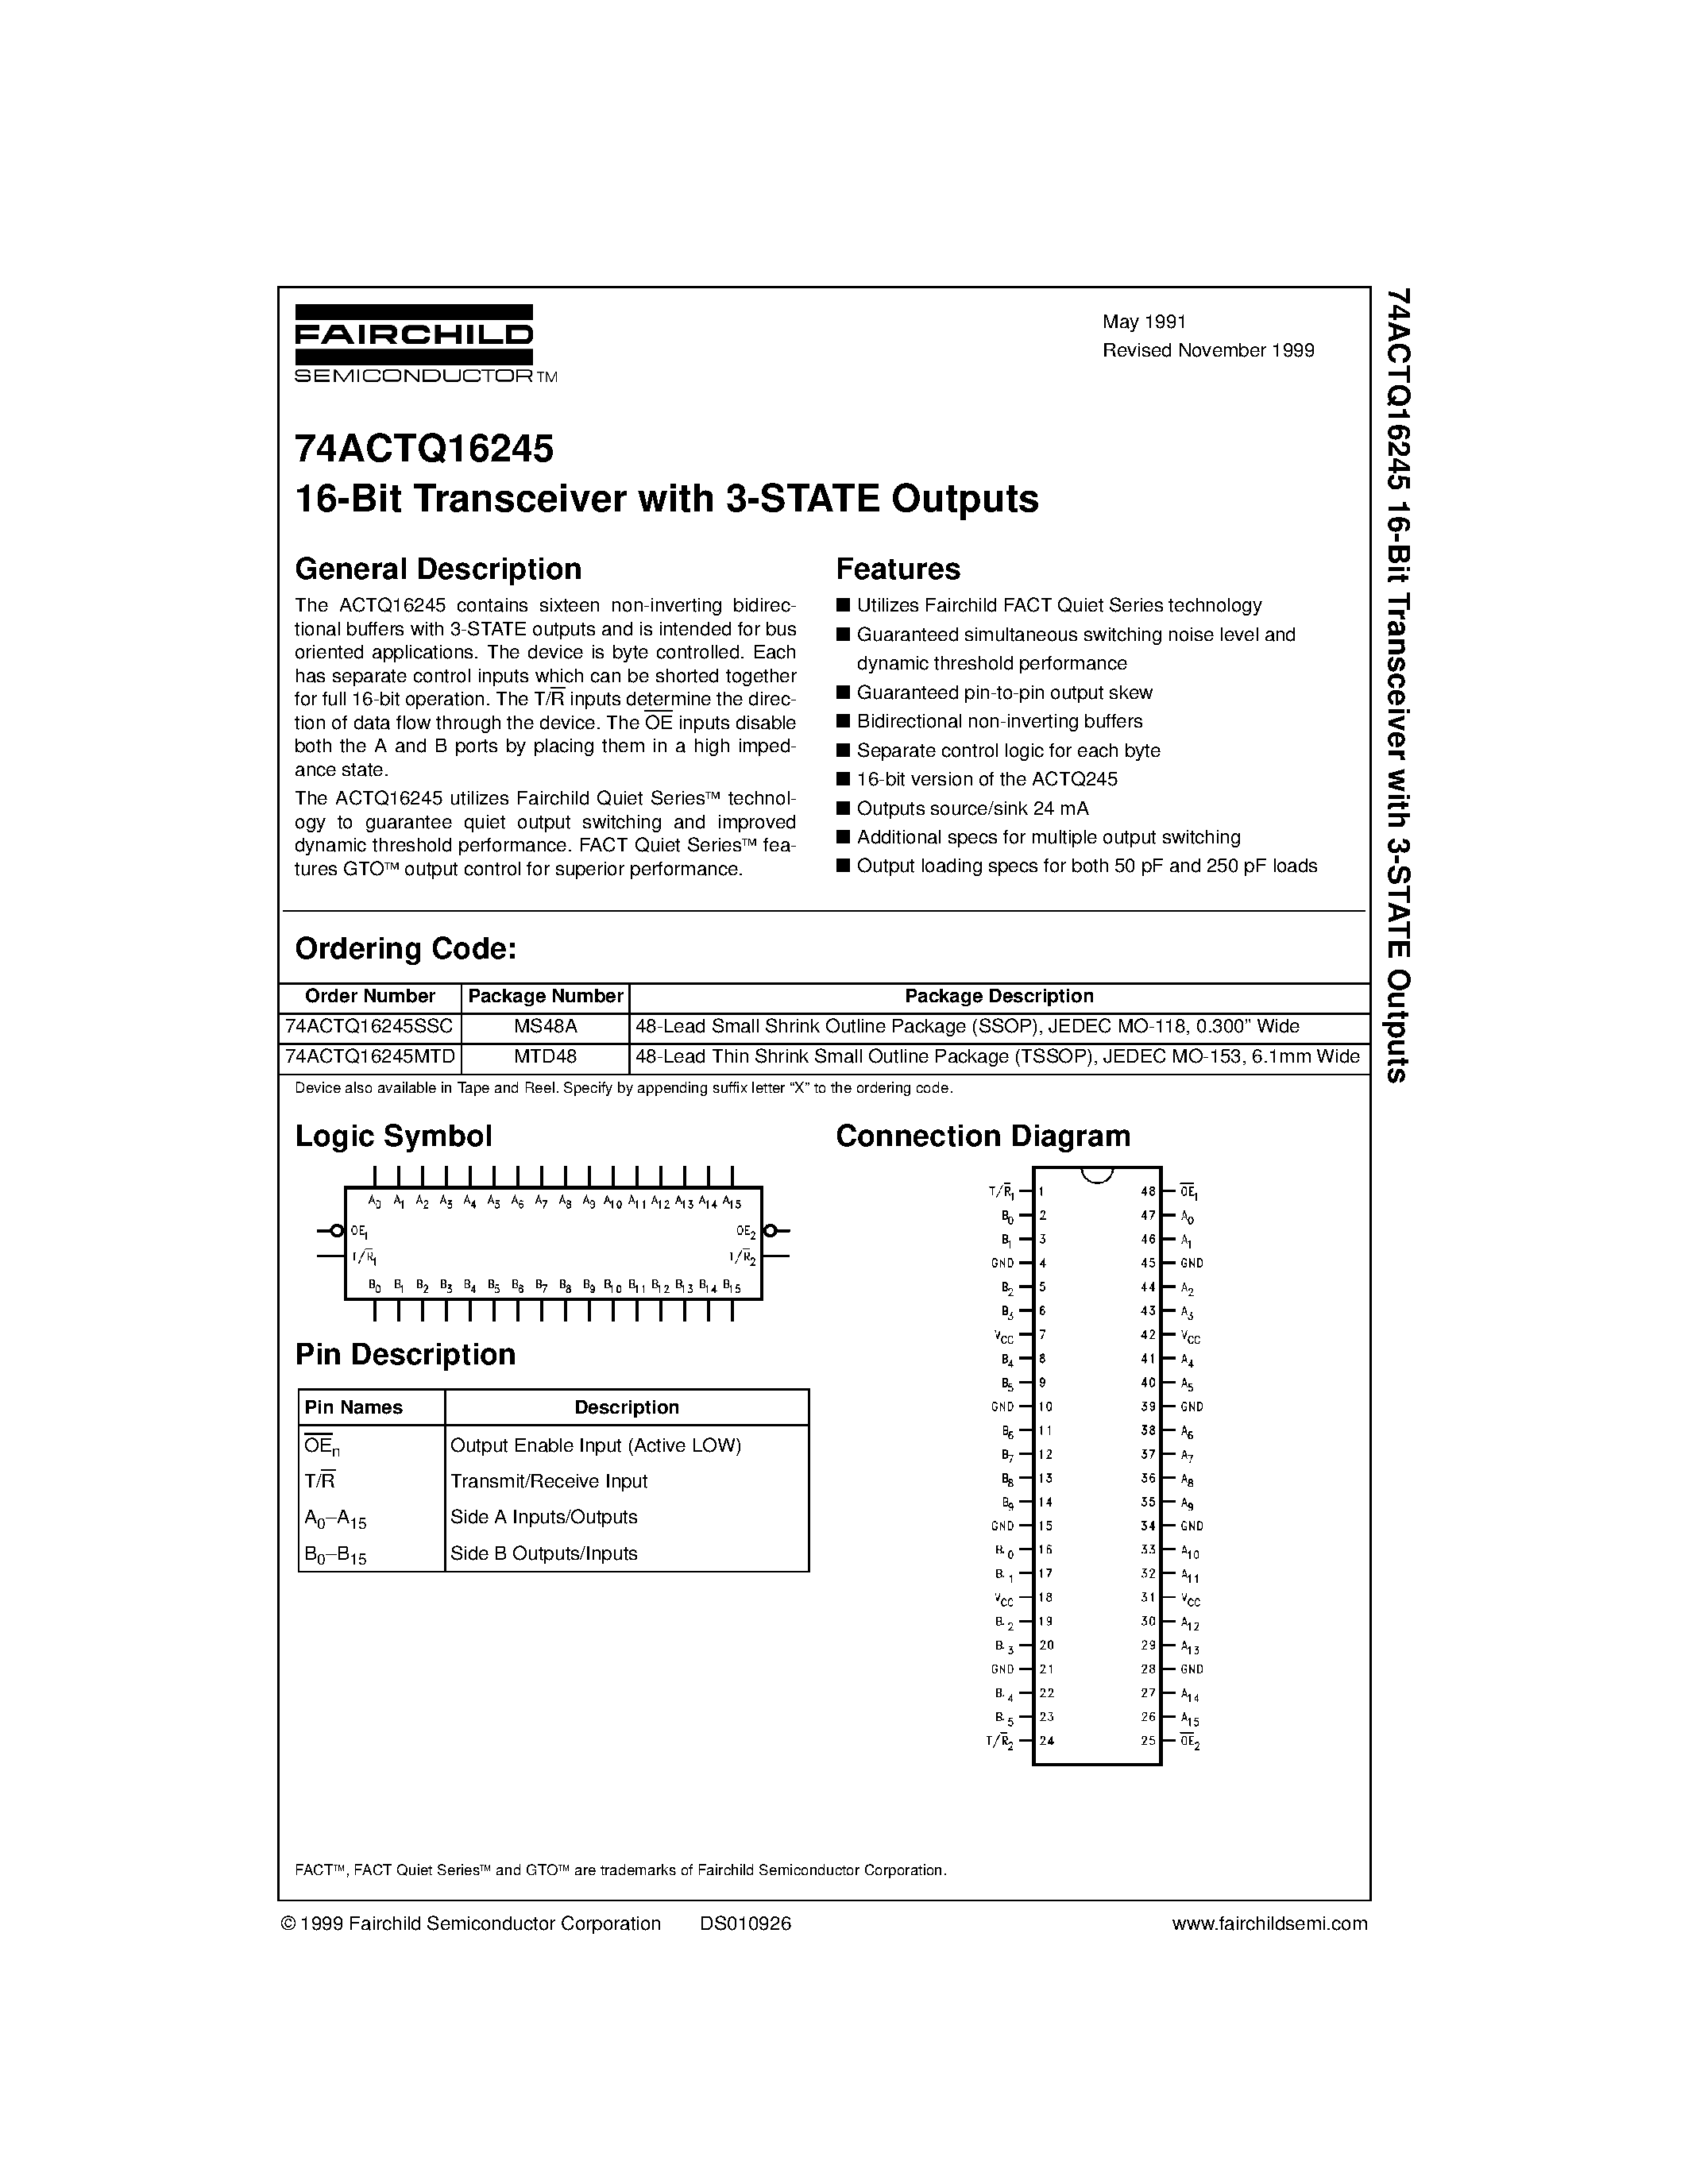 Datasheet 74ACTQ16245MTD - 16-Bit Transceiver with 3-STATE Outputs page 1